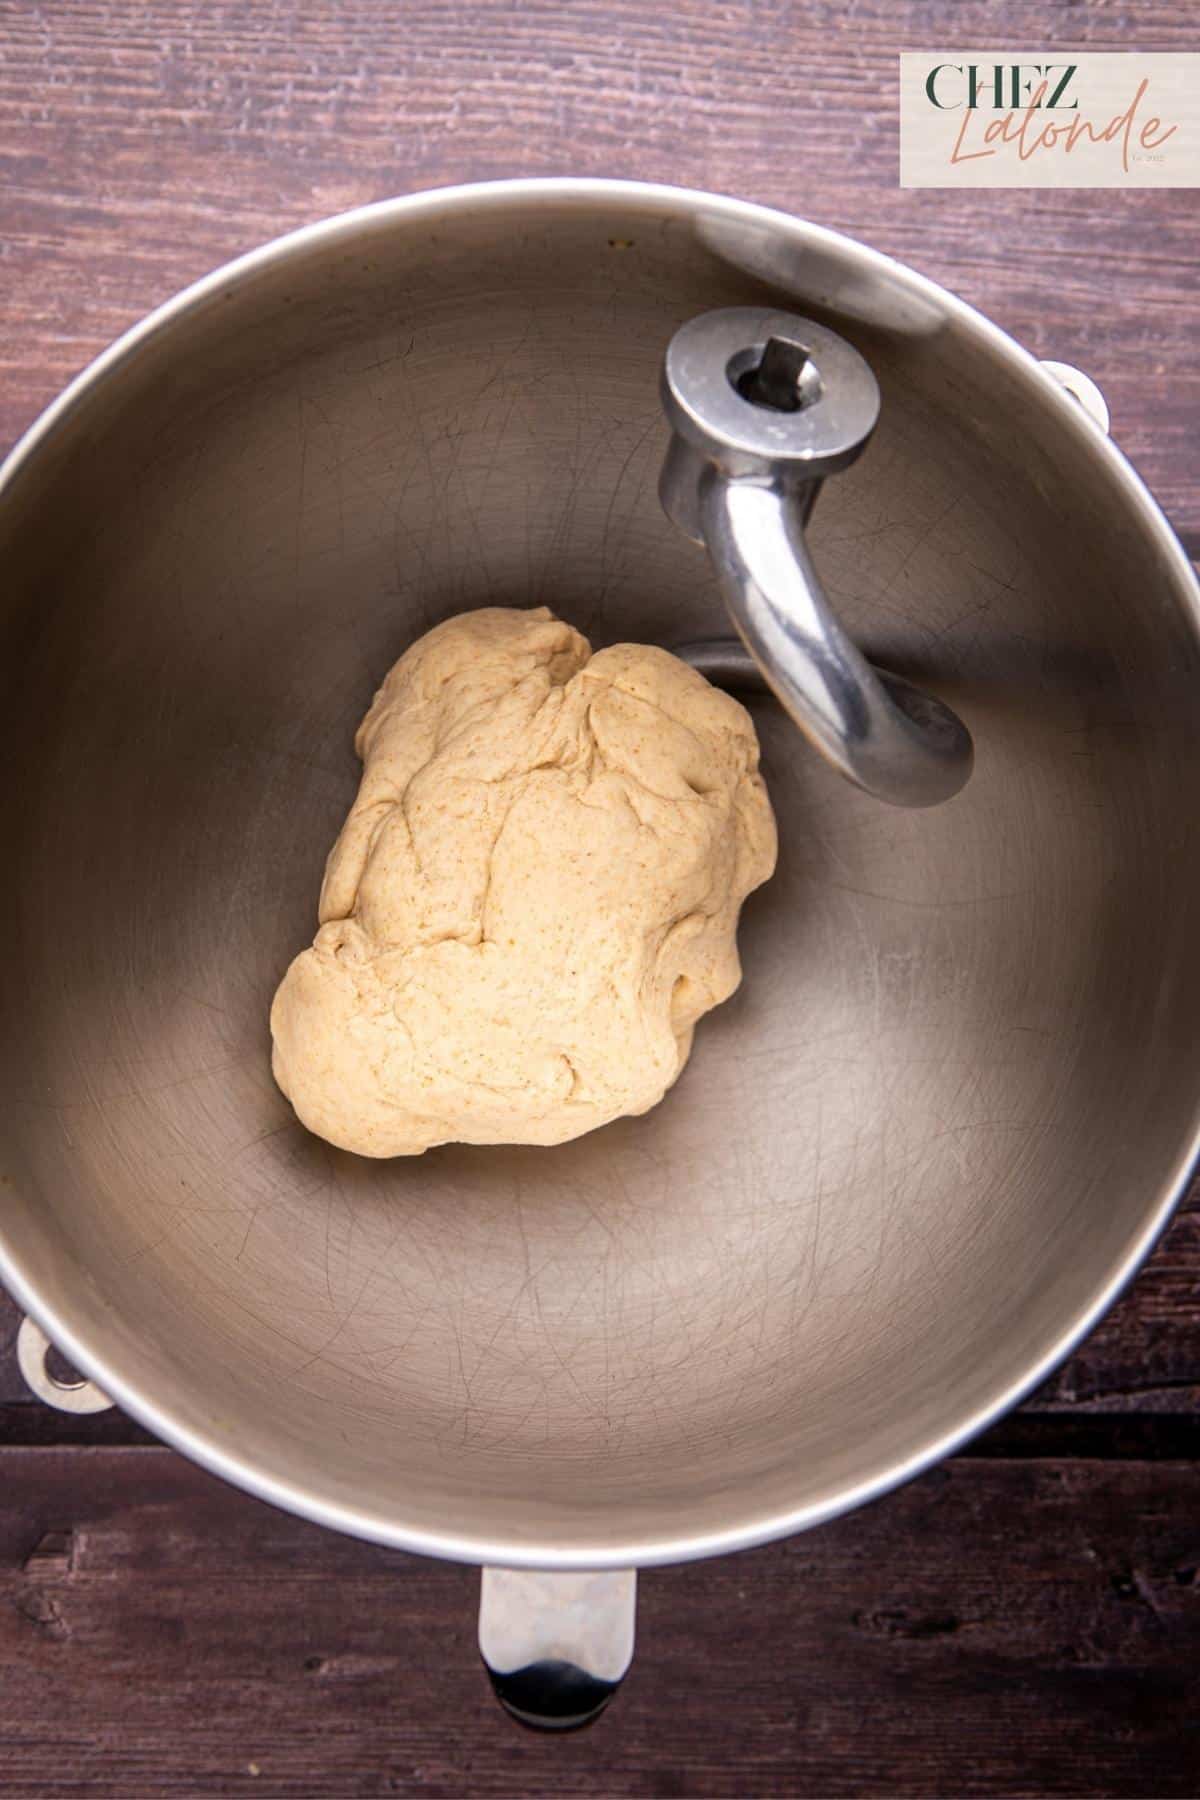 knead at medium-high speed (Speed setting at 6 to 8) for 5 to 8 minutes until smooth.